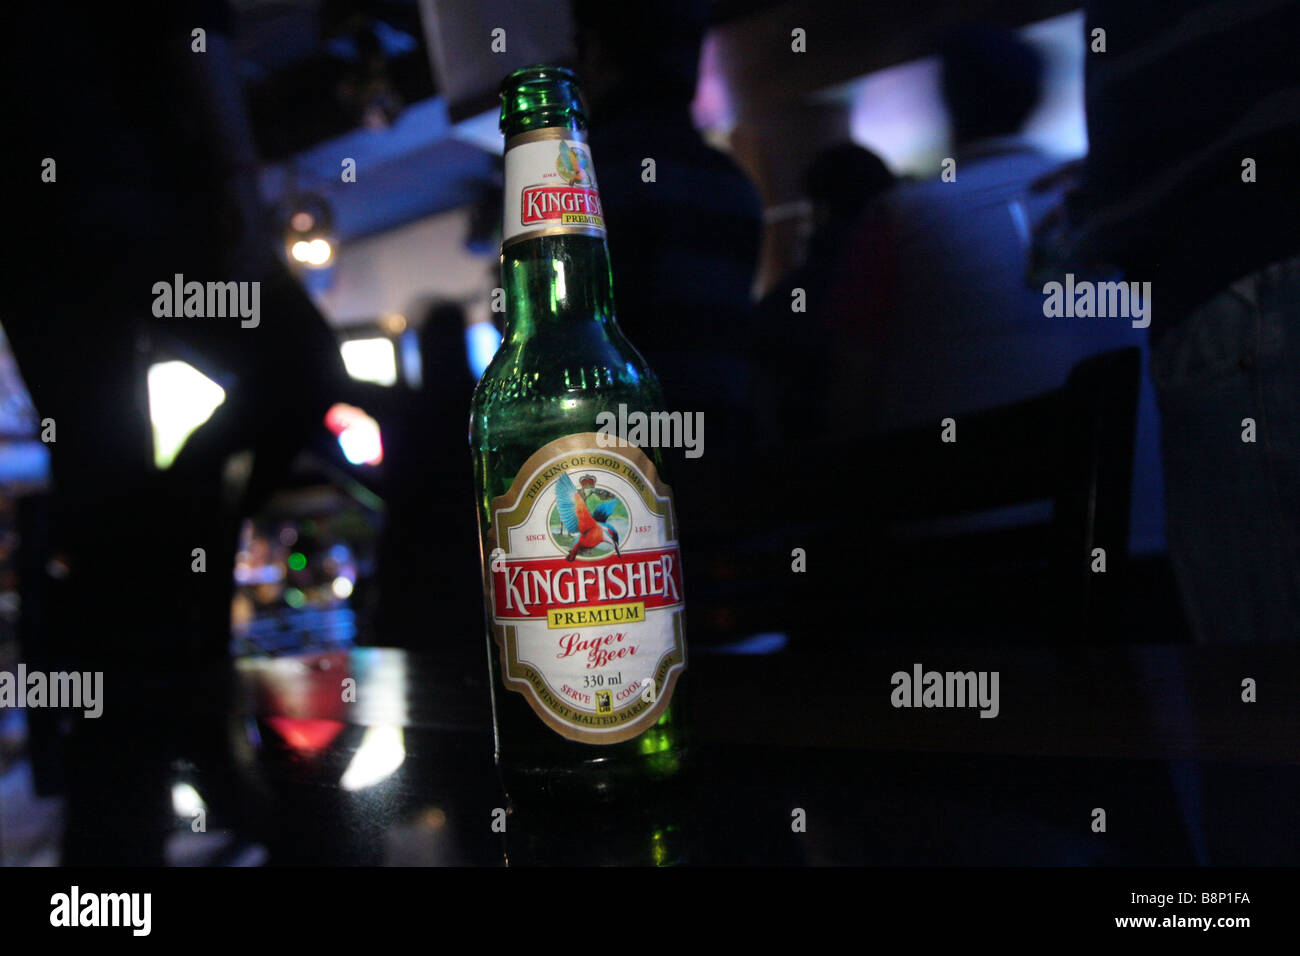 A Bottle Of Kingfisher Beer Stands On A Table In A Night Club In Chandigarh In India Stock Photo Alamy